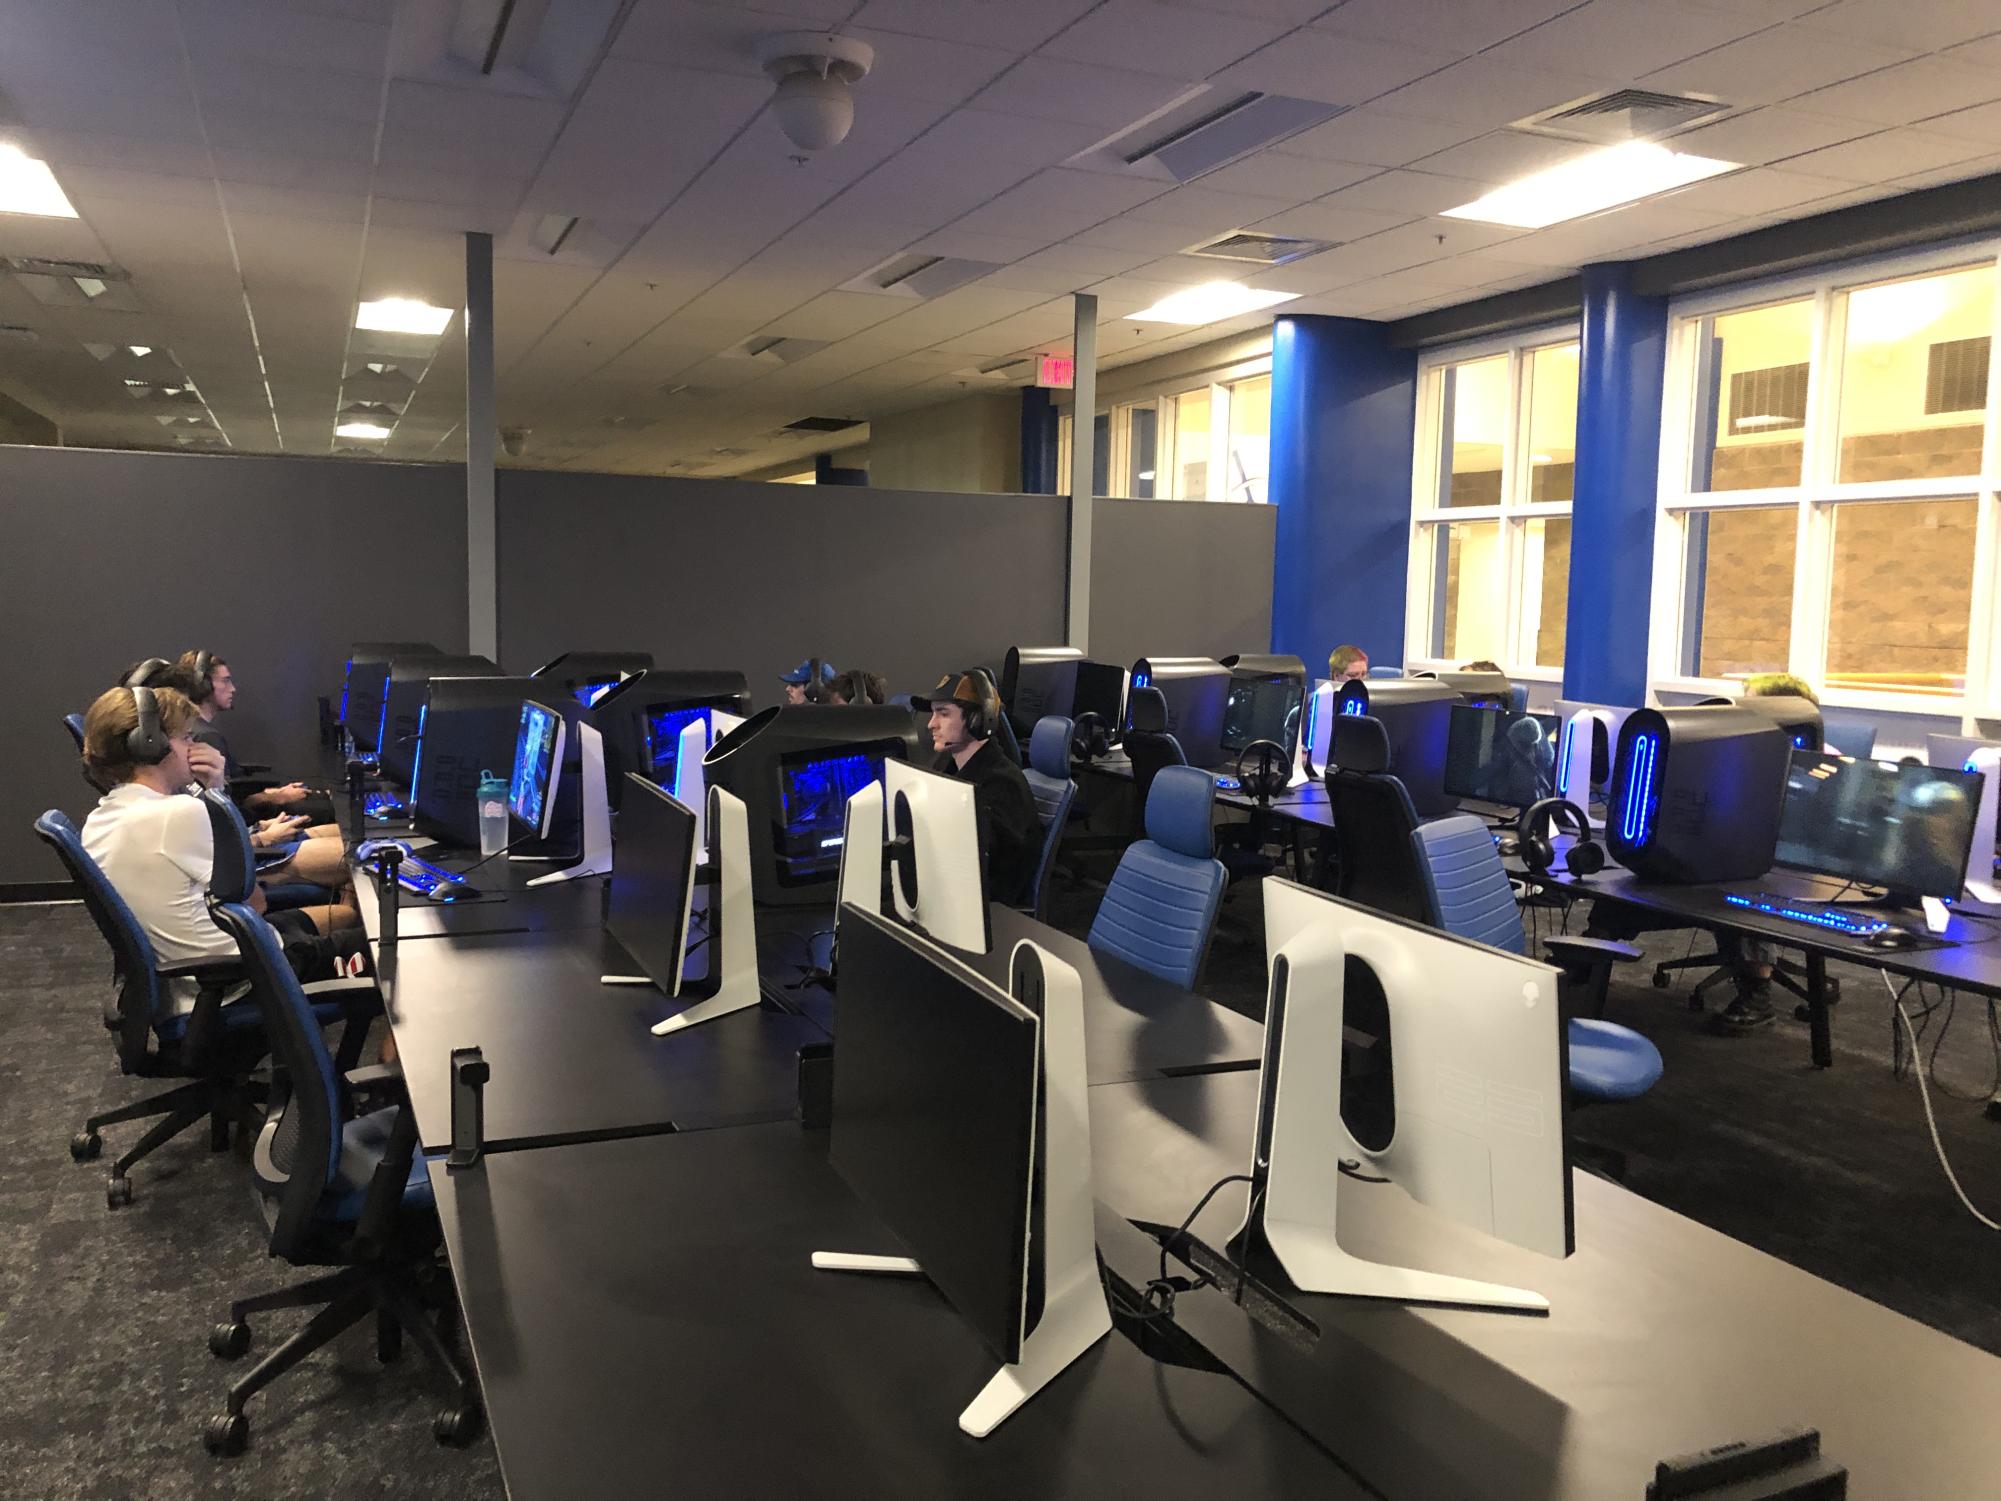 Pictured is the Esports Center located on the main floor of the Sherril Center at UNC Asheville.